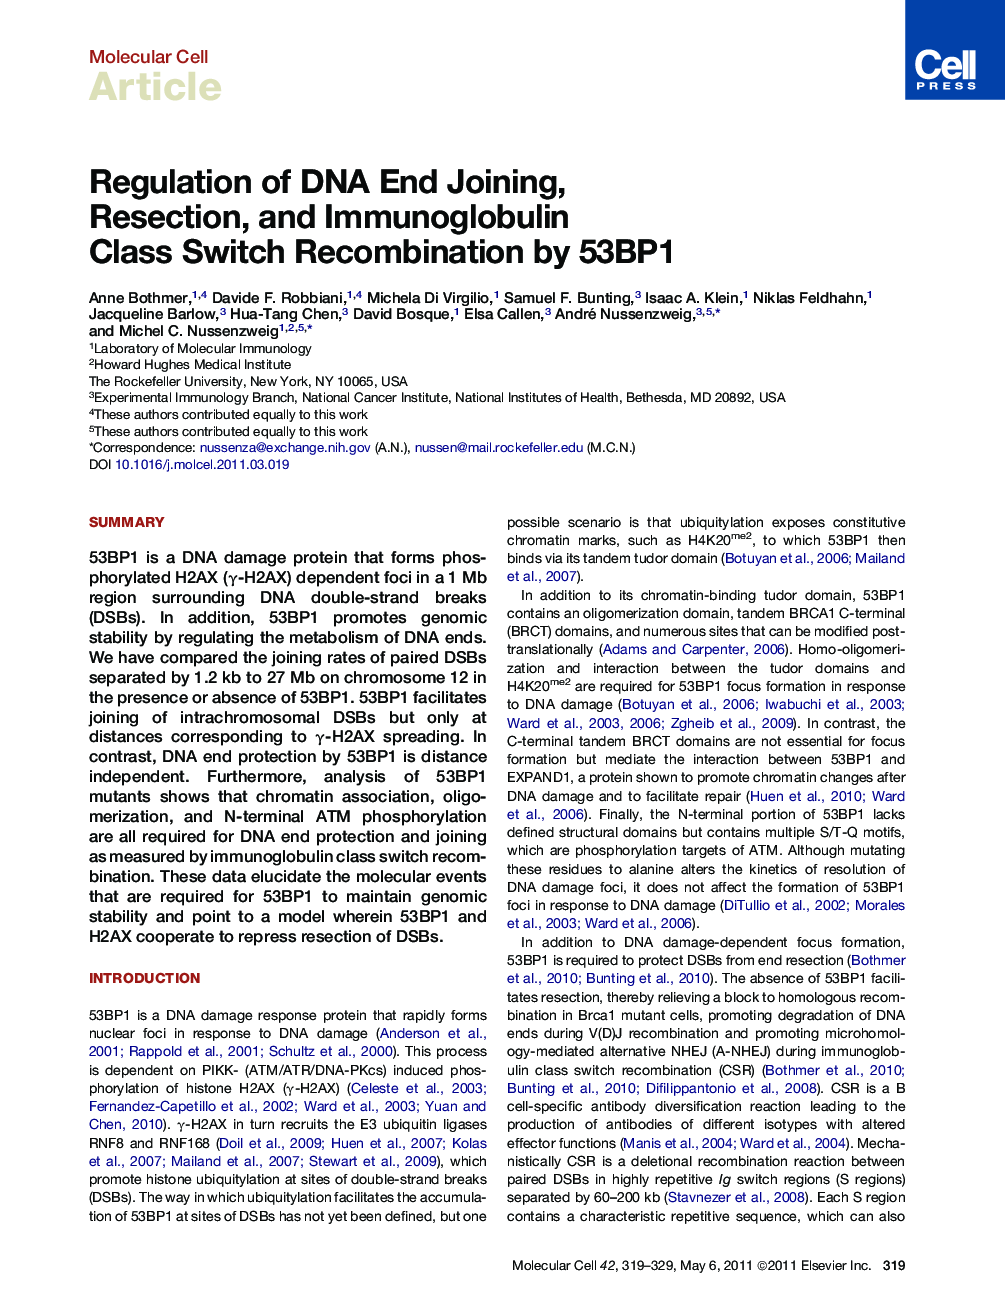 Regulation of DNA End Joining, Resection, and Immunoglobulin Class Switch Recombination by 53BP1